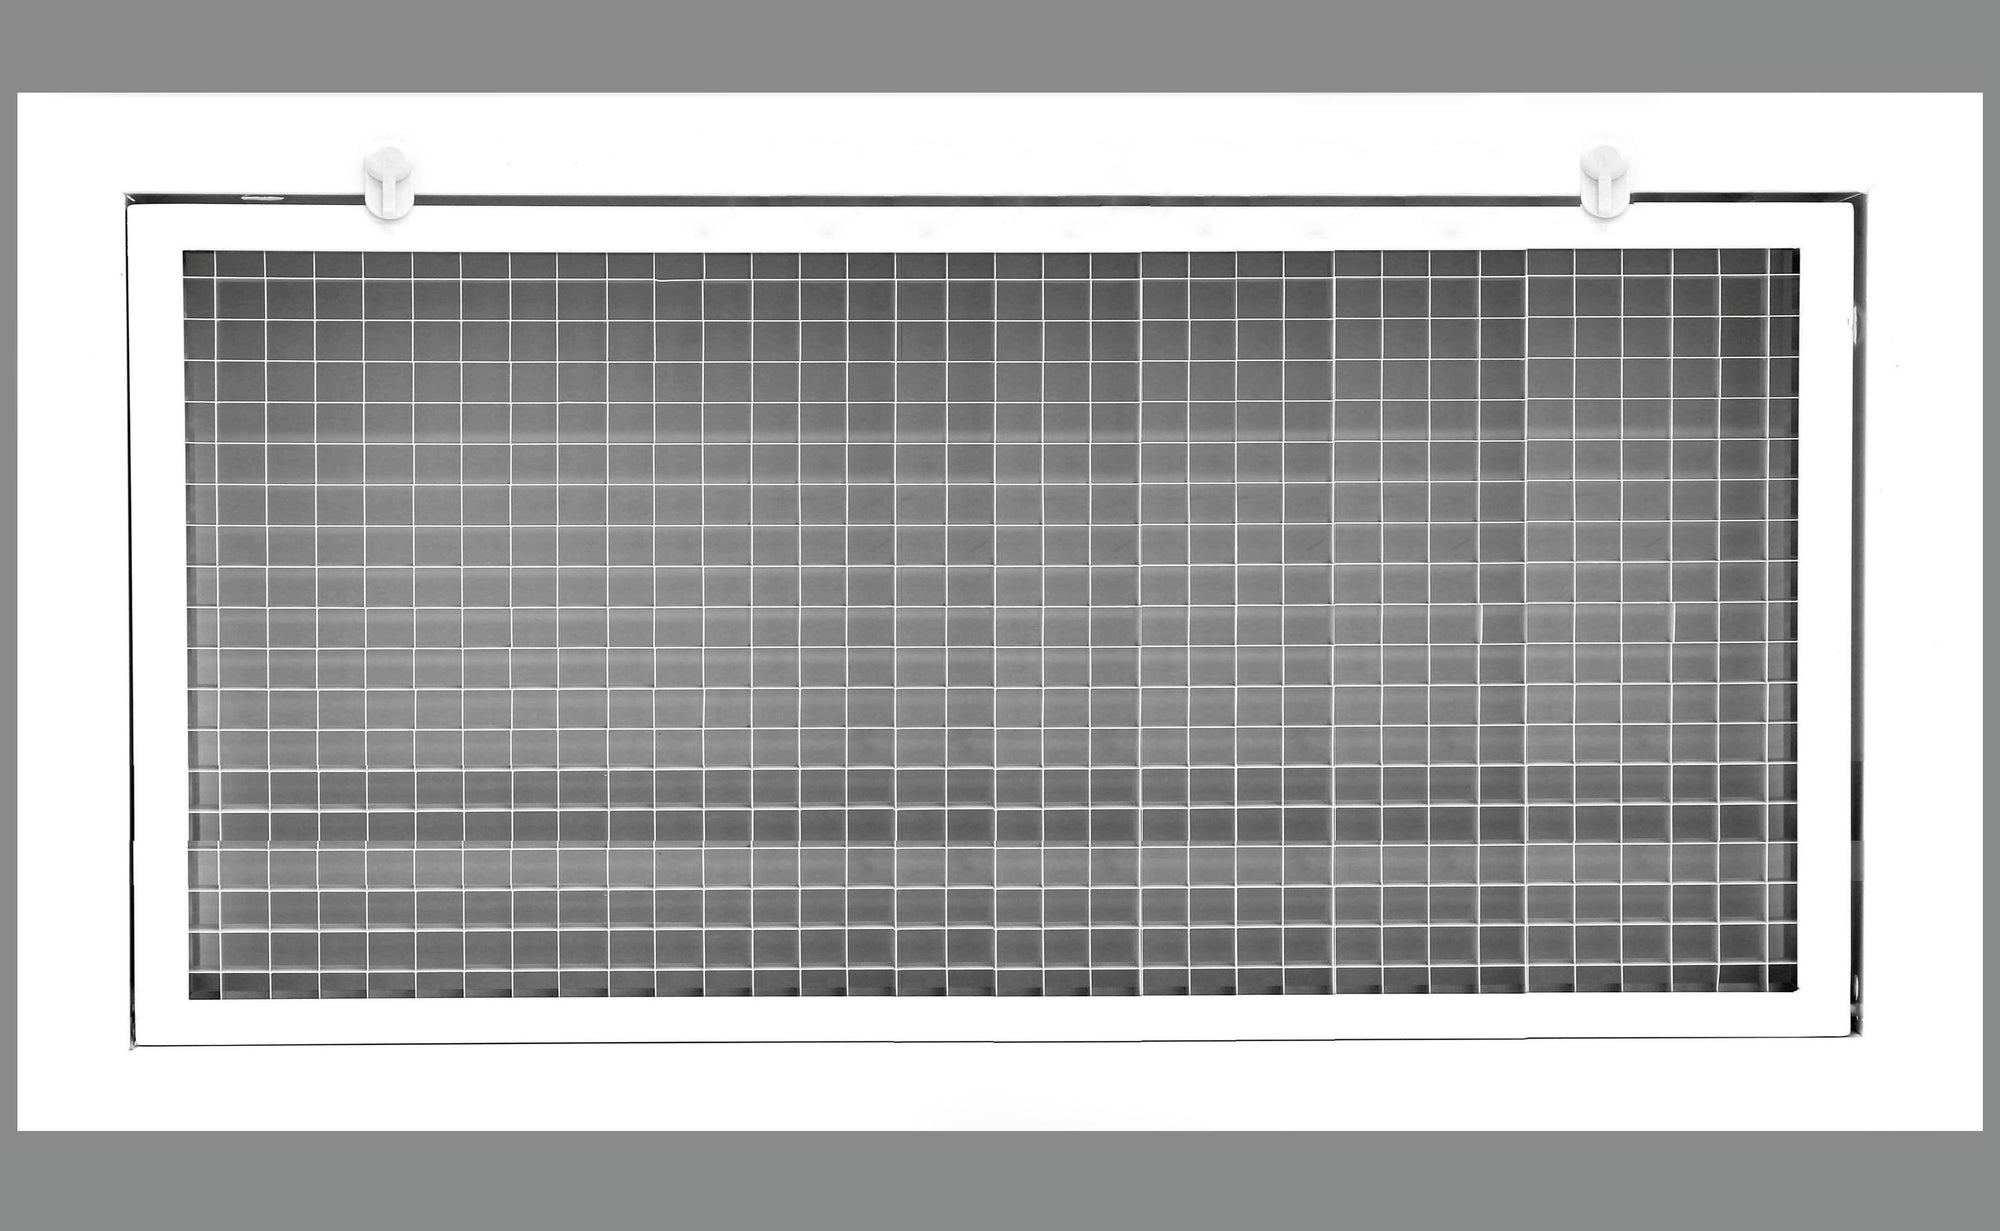 24" x 6" Cube Core Eggcrate Return Air Filter Grille for 1" Filter